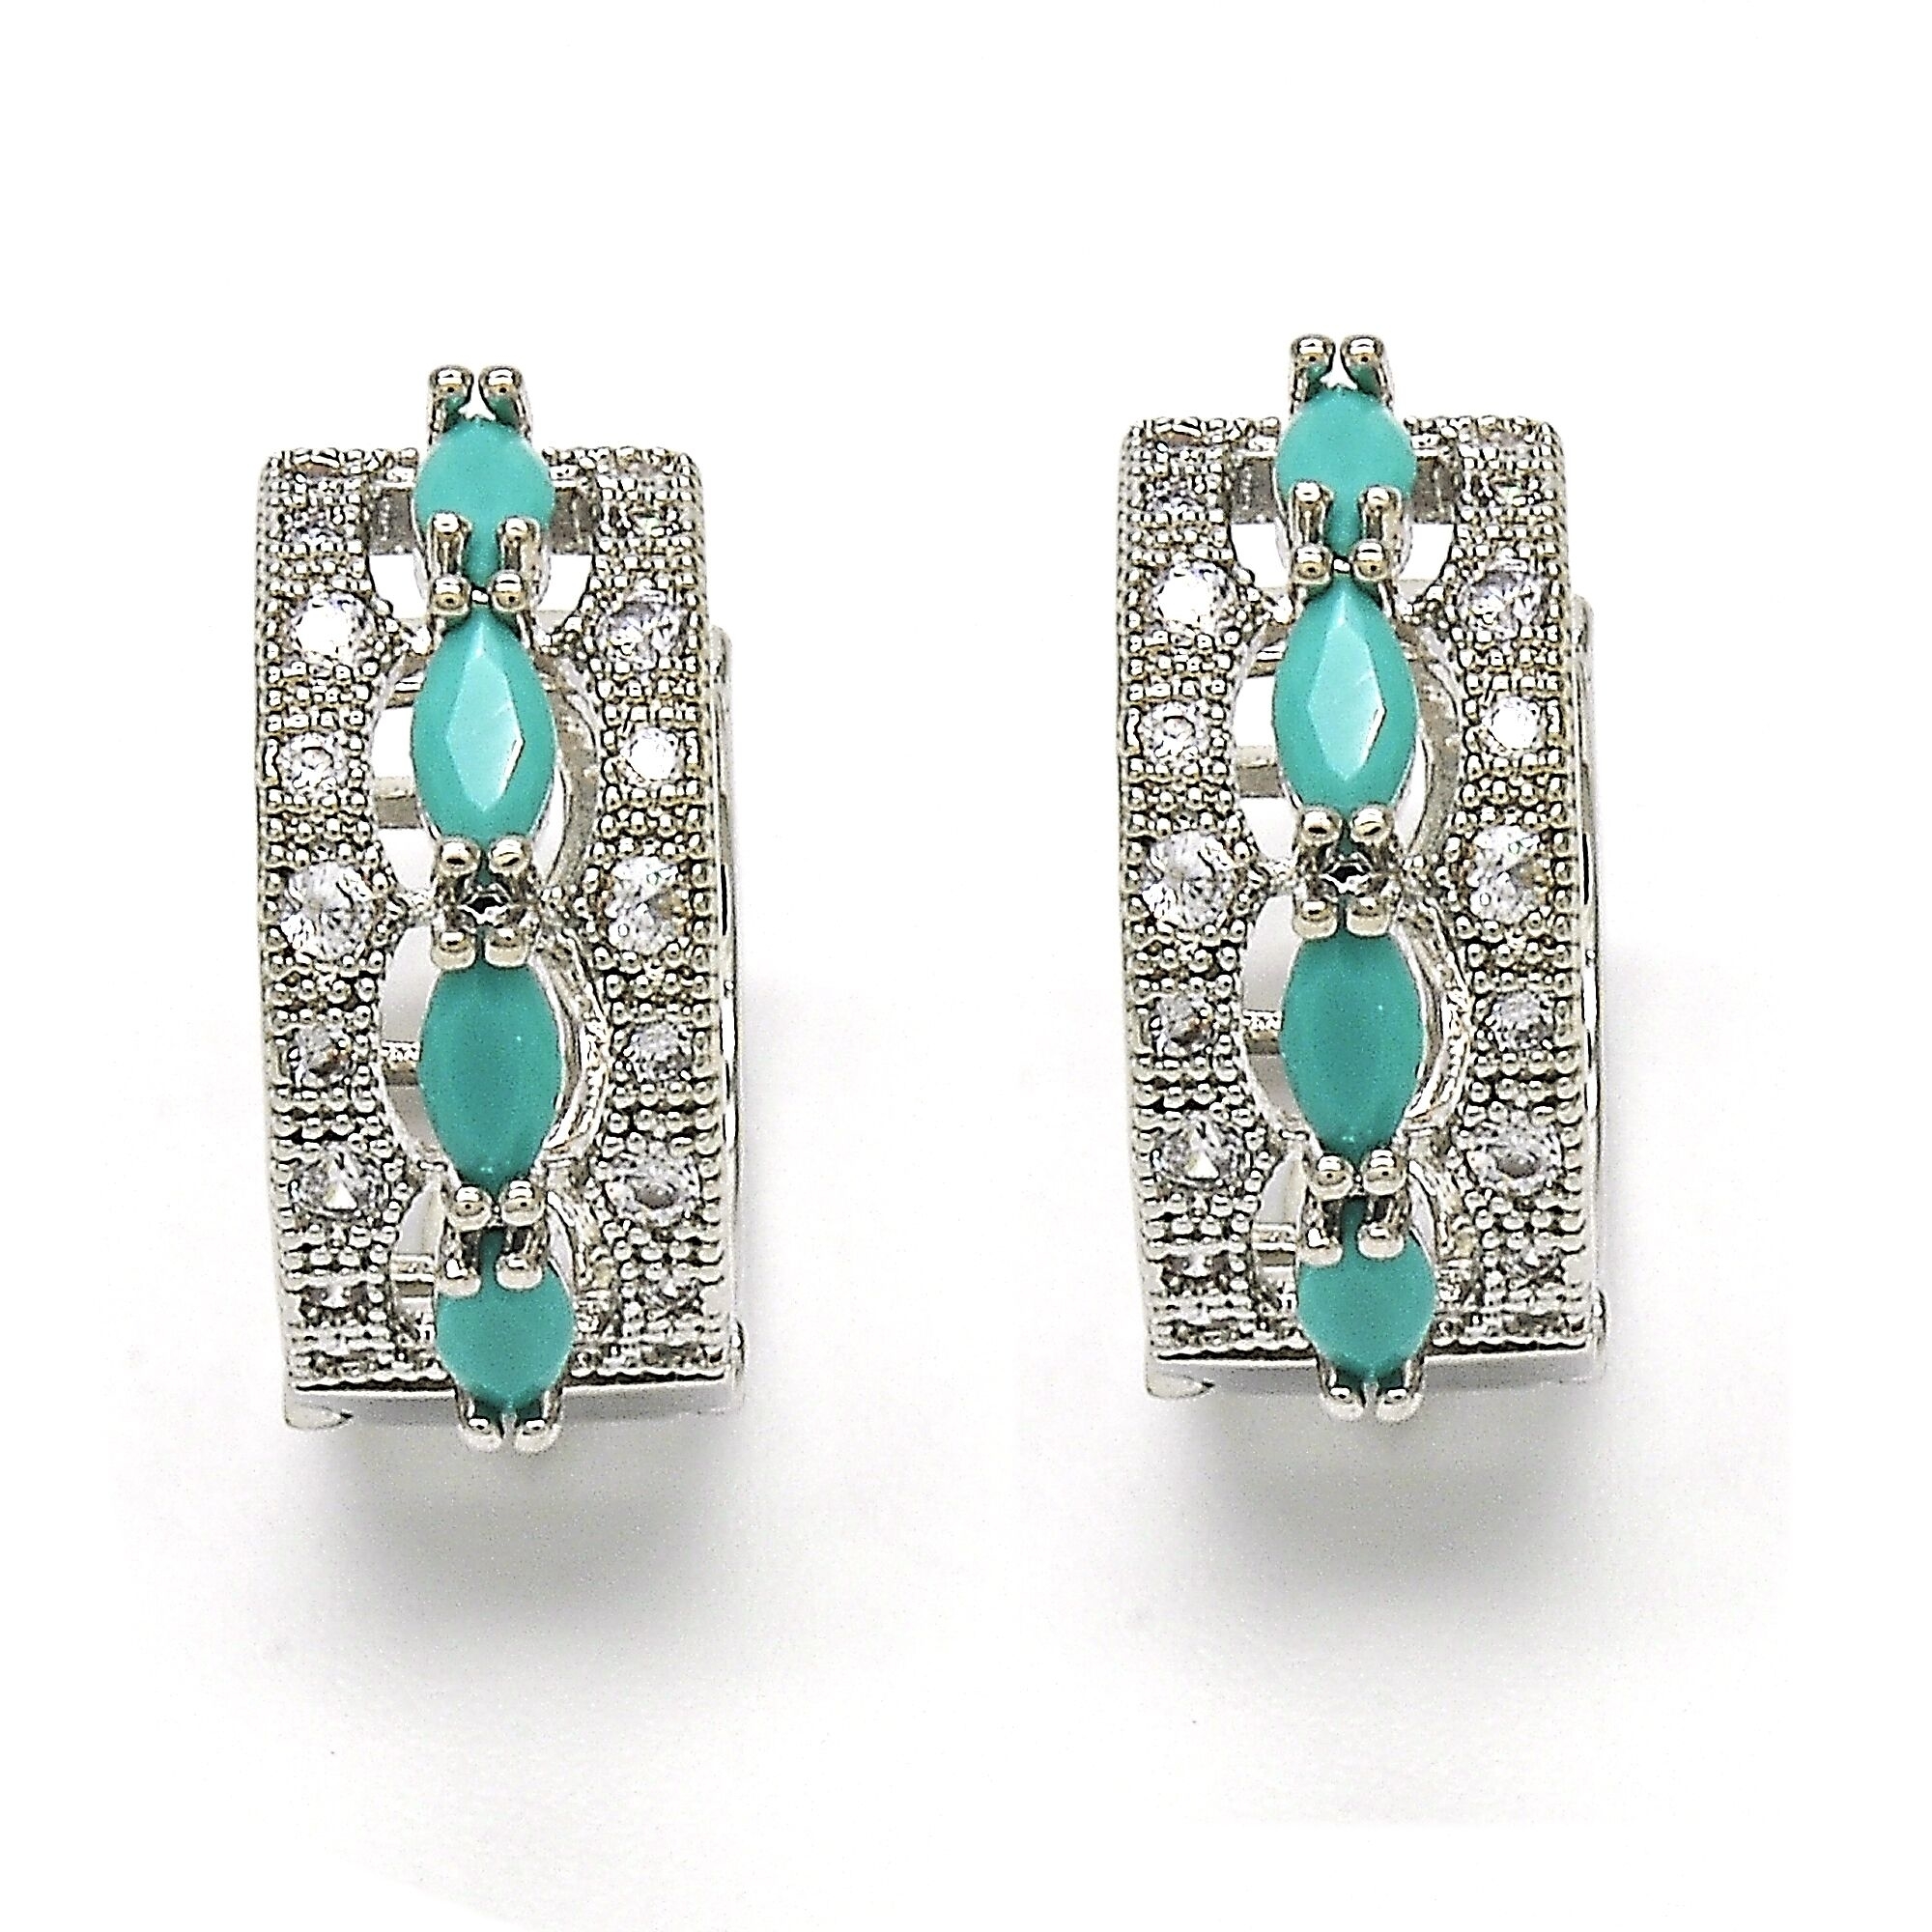 RHODIUM Filled High Polish Finsh LAB CREATED TURQUOISE OVAL EARRINGS